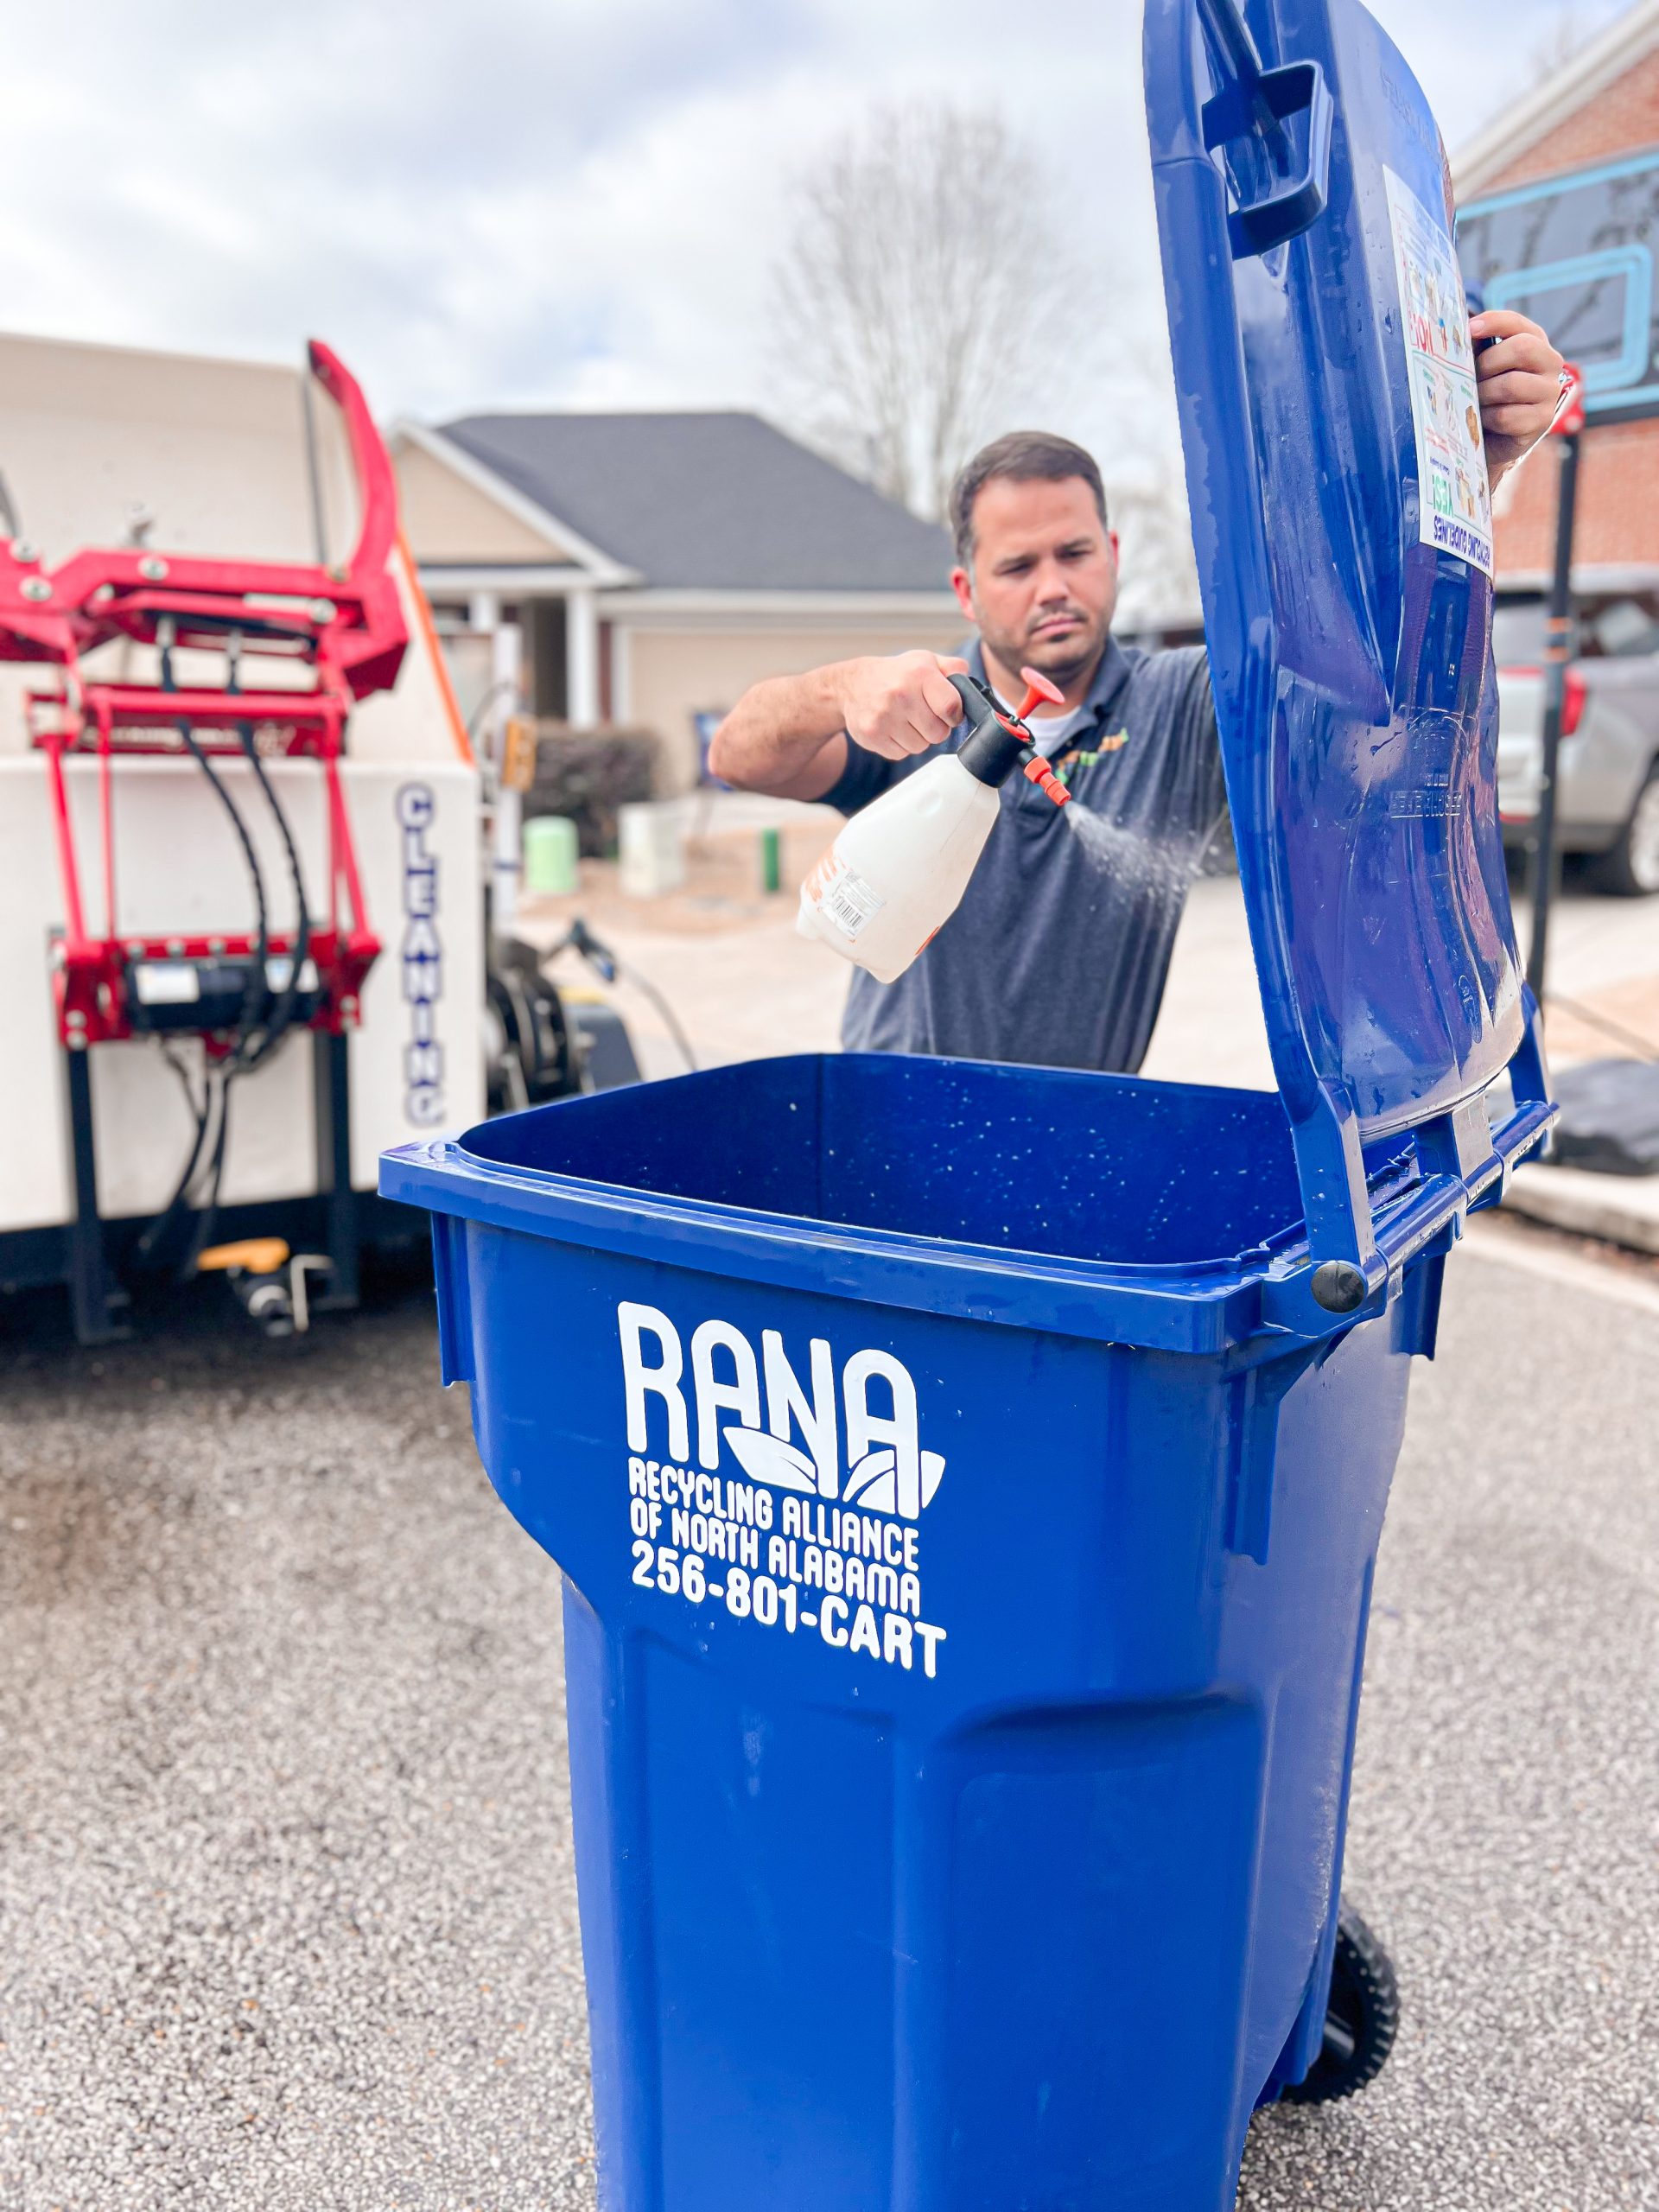 All Things Madison | Hurricane Bin Cleaning: The Service You Will Absolutely Love That You Never Knew You Needed